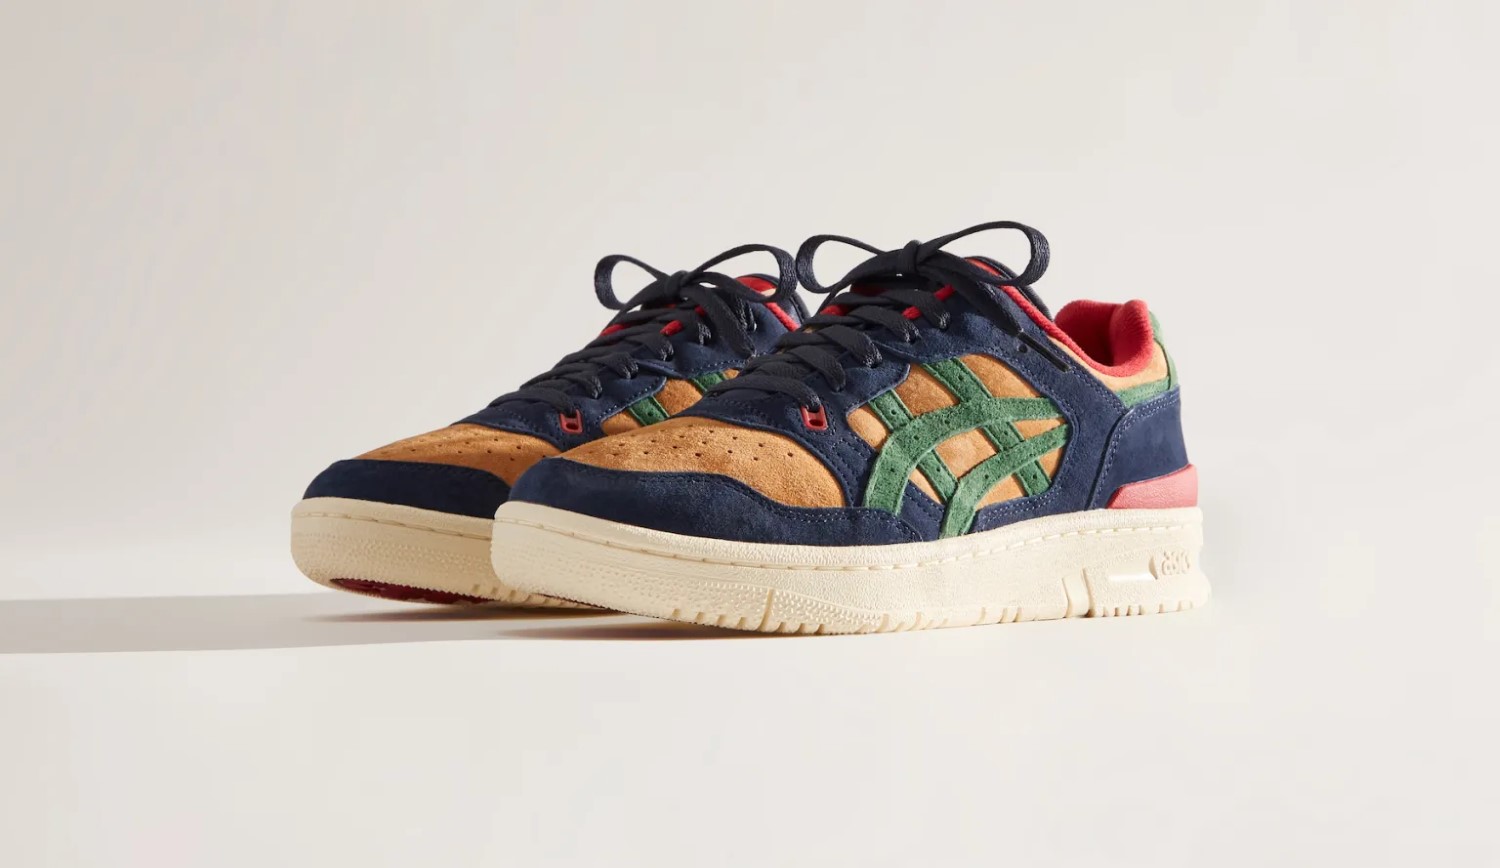 Unwrap the Kith x Asics EX89 "Outdoor" in a festive Christmas colorway